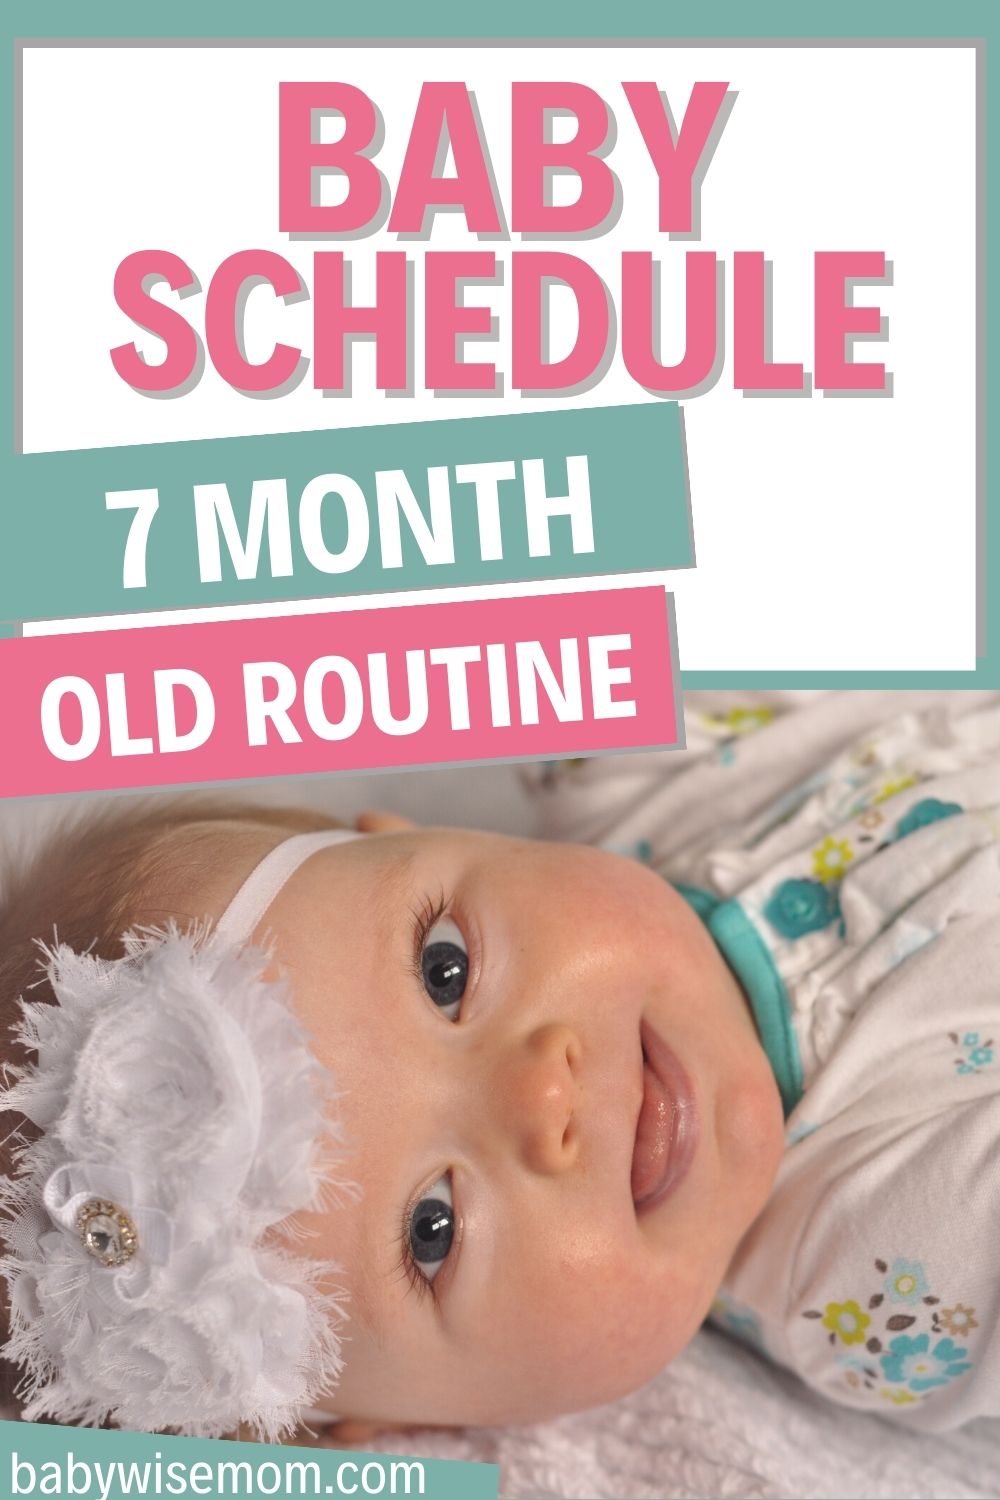 7 month old routine